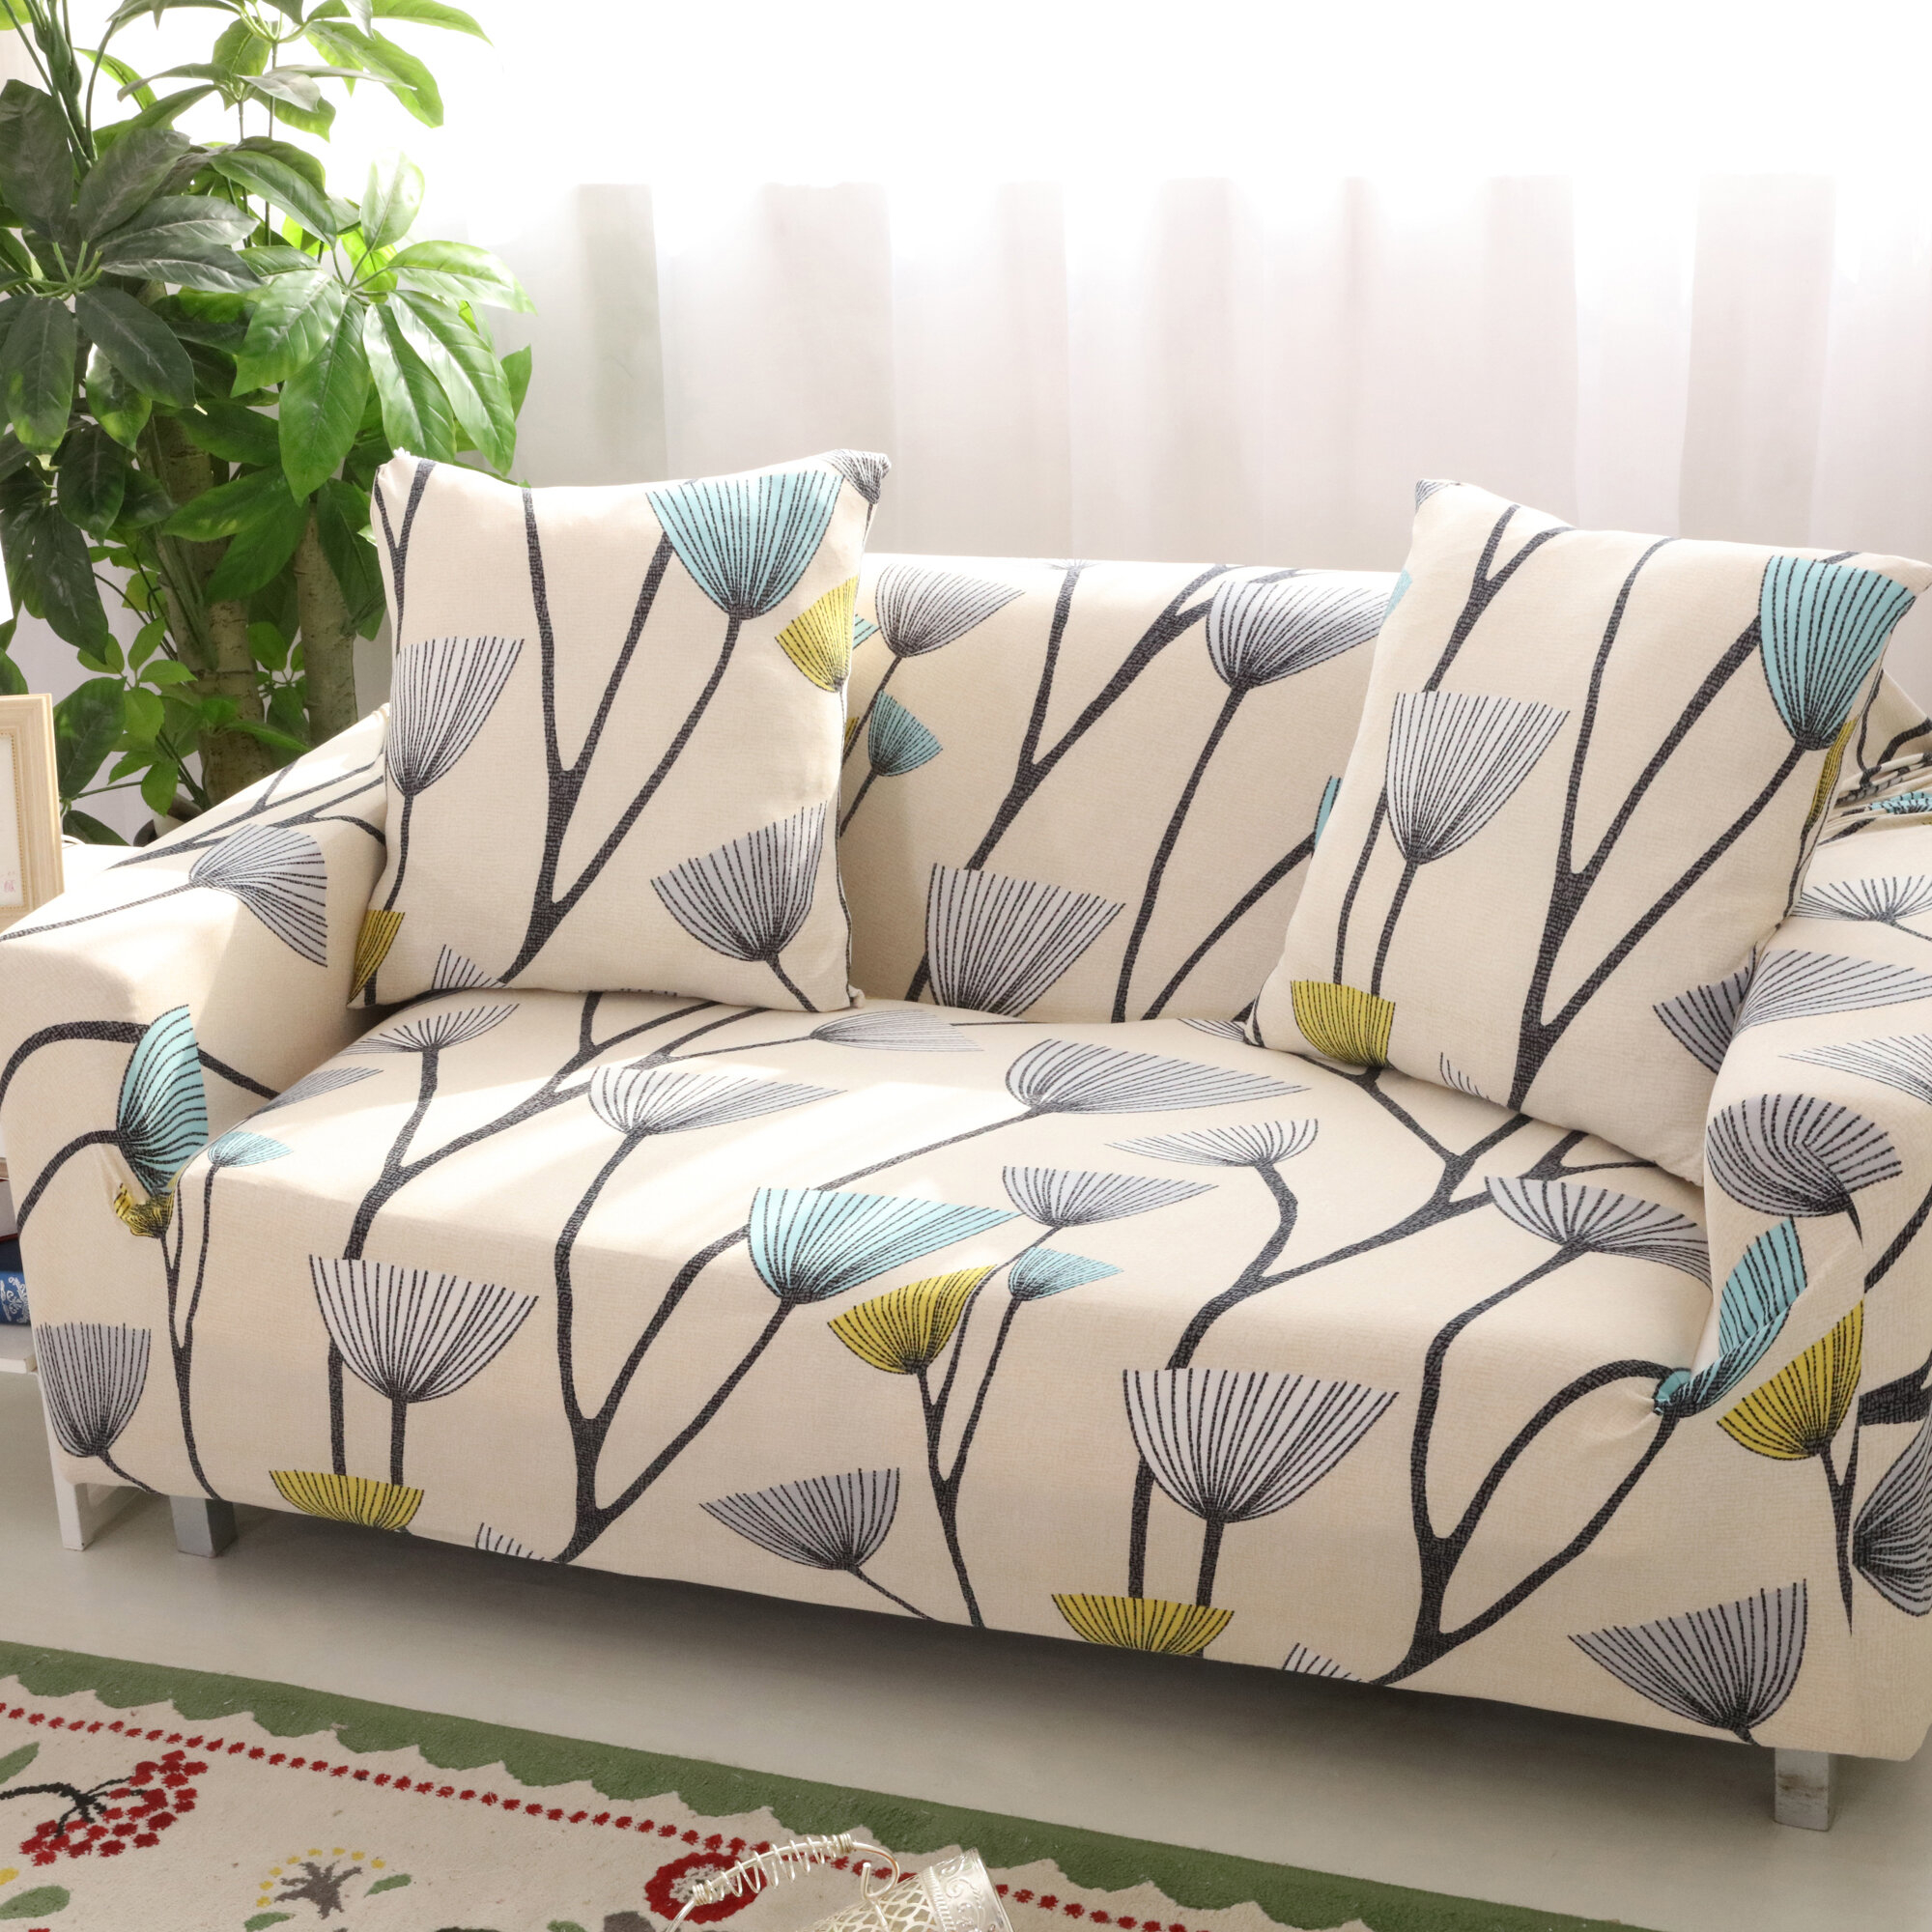 Floral stretch couch cover